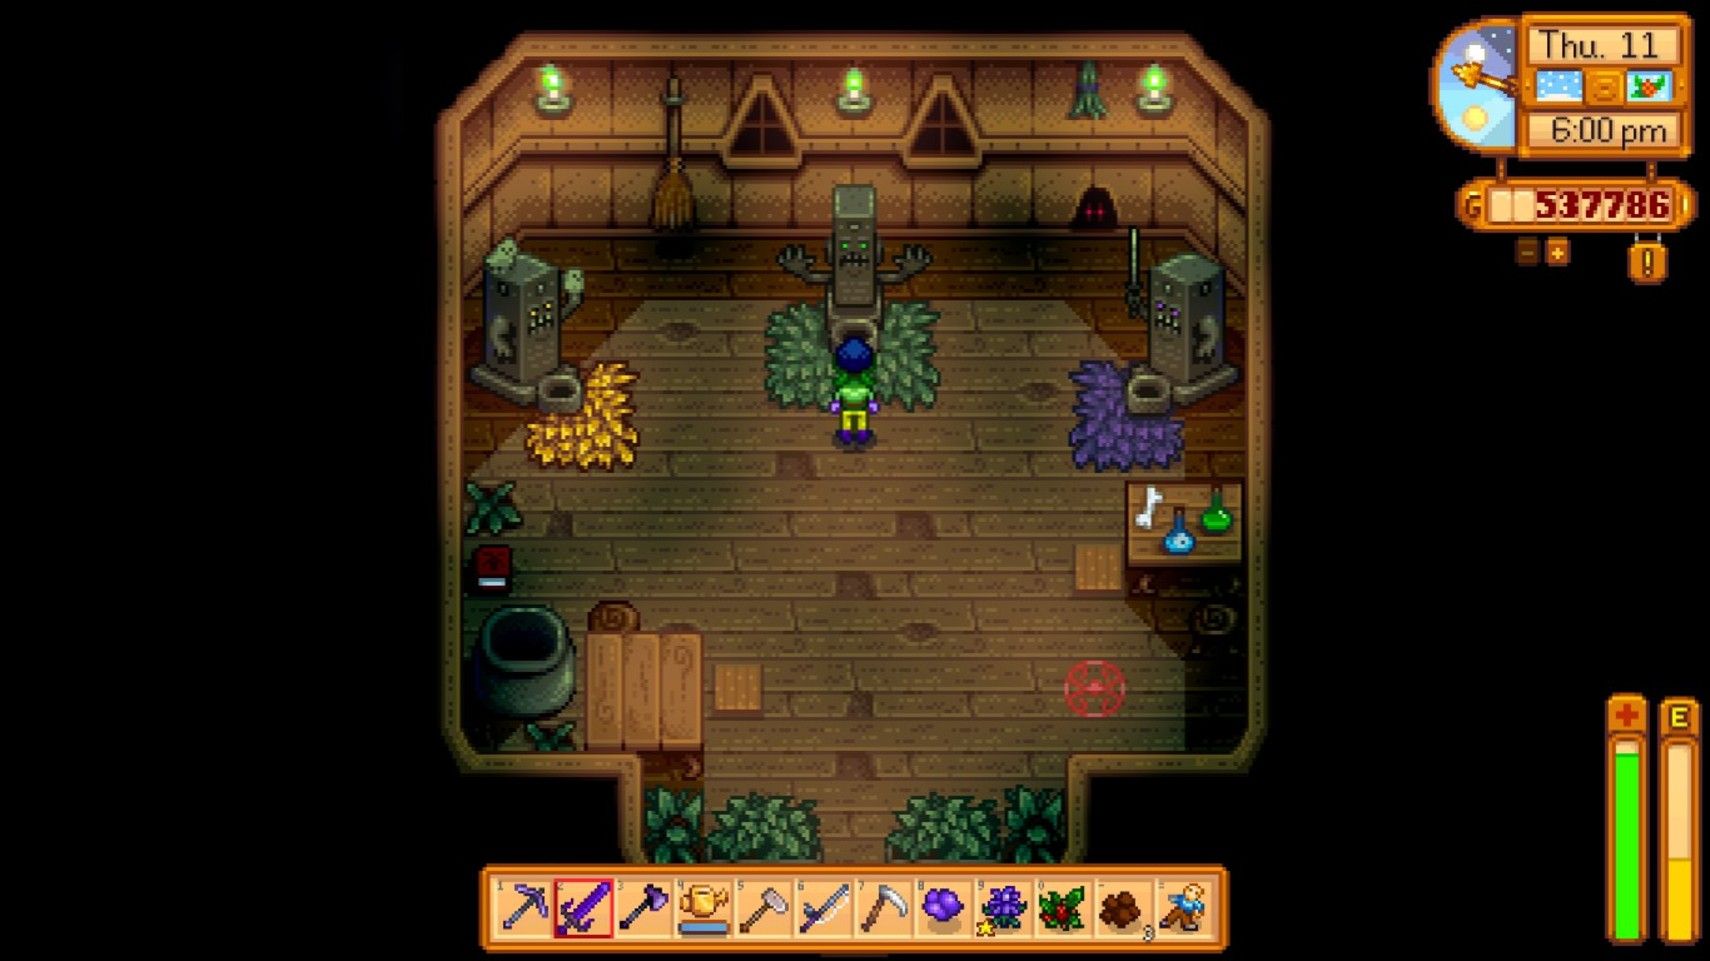 How To Get Past The Goblin In Stardew Valley.